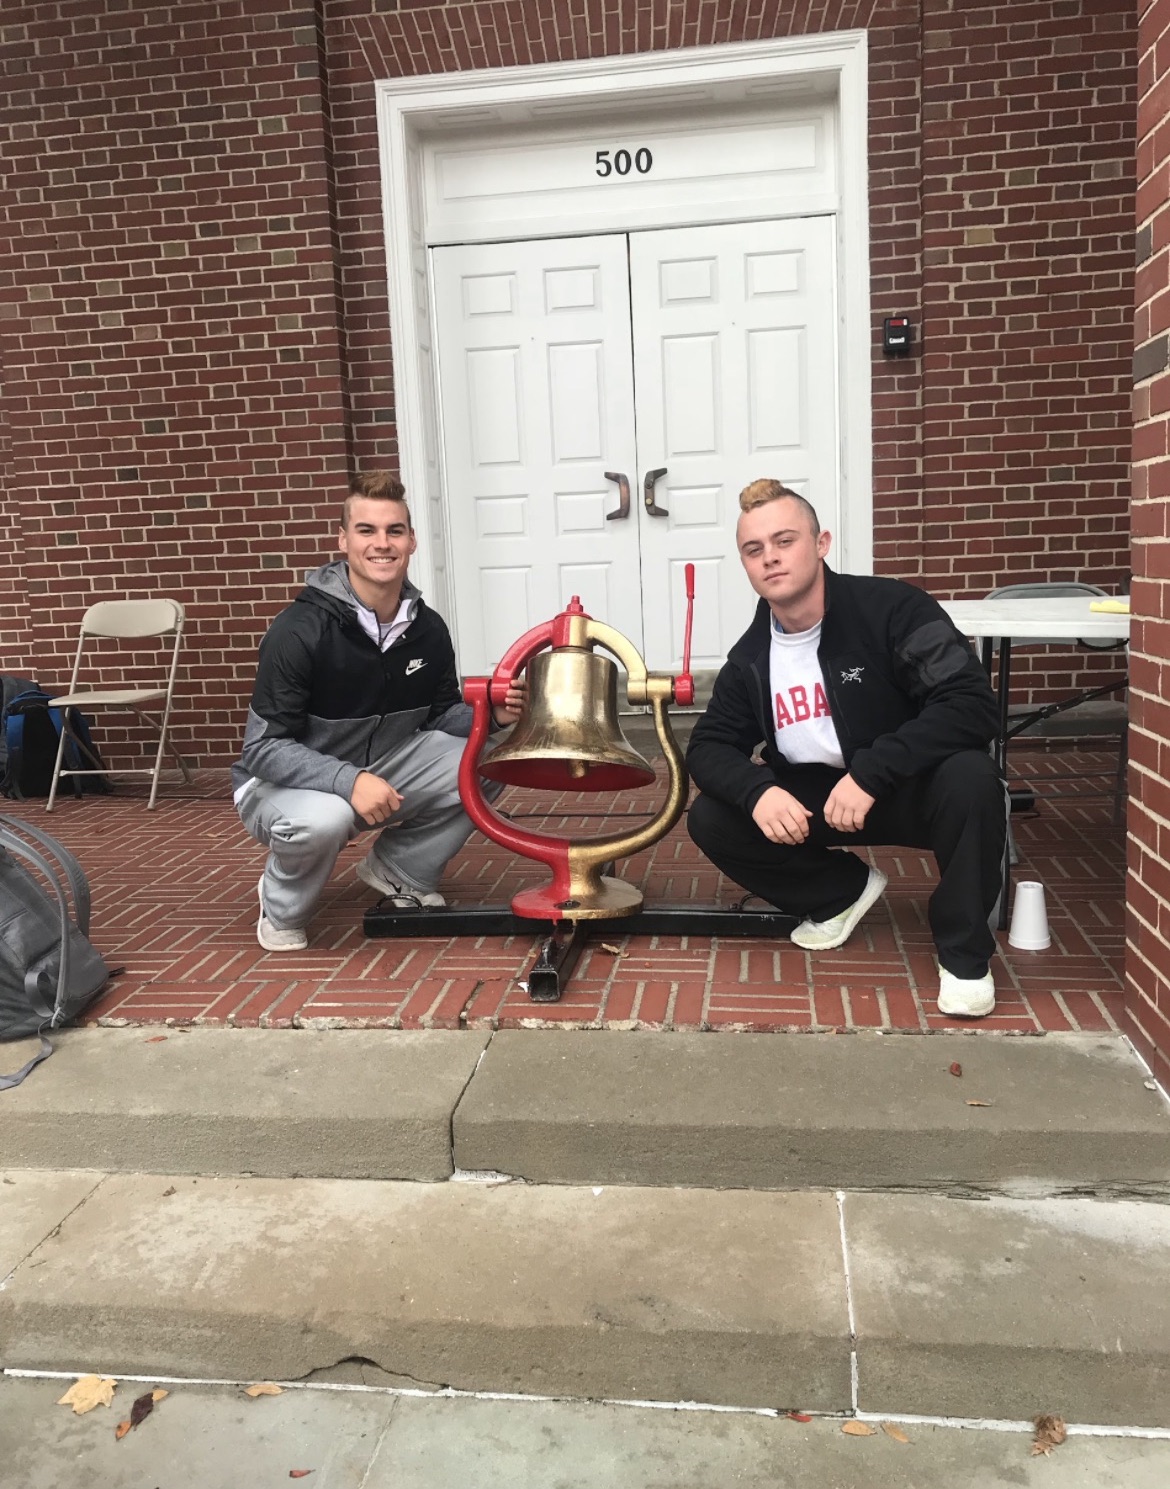 Woodward said one of his favorite college memories was when Wabash beat DePauw University, 42-35, to win the 127th Monon Bell Classic. 